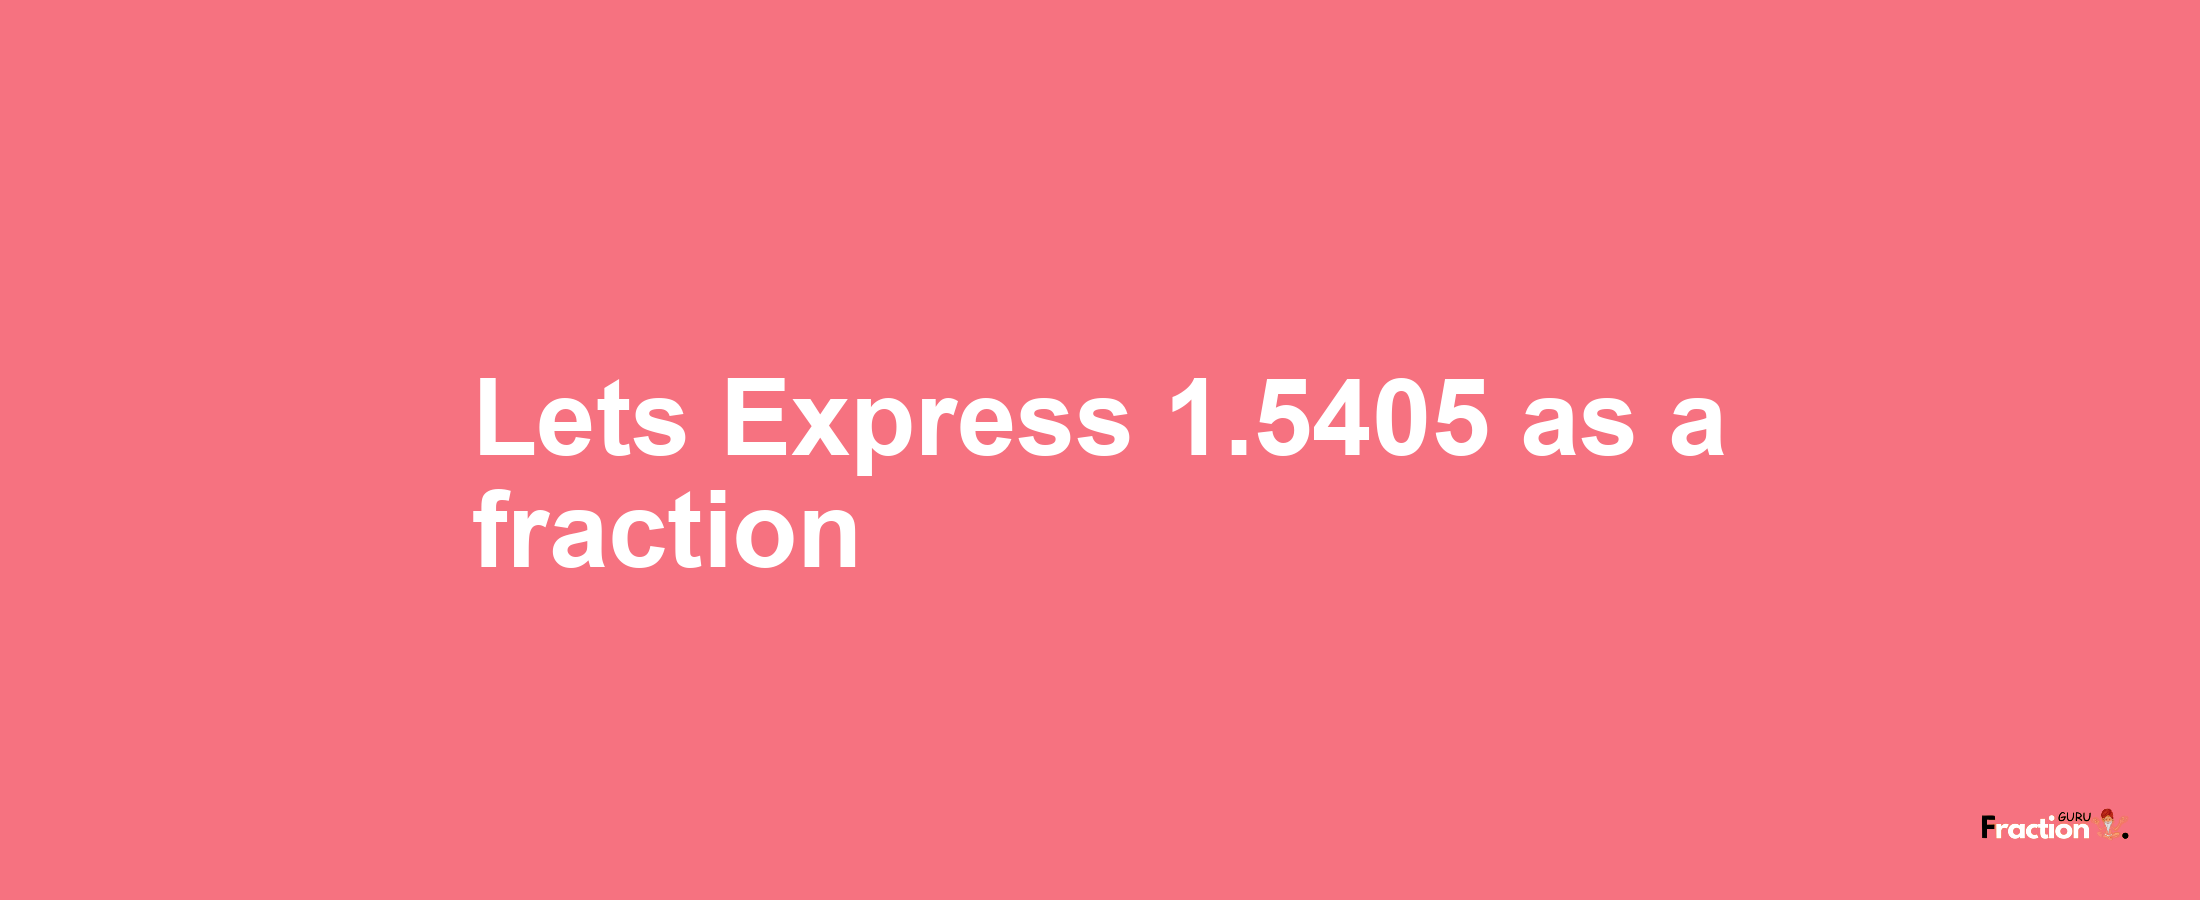 Lets Express 1.5405 as afraction